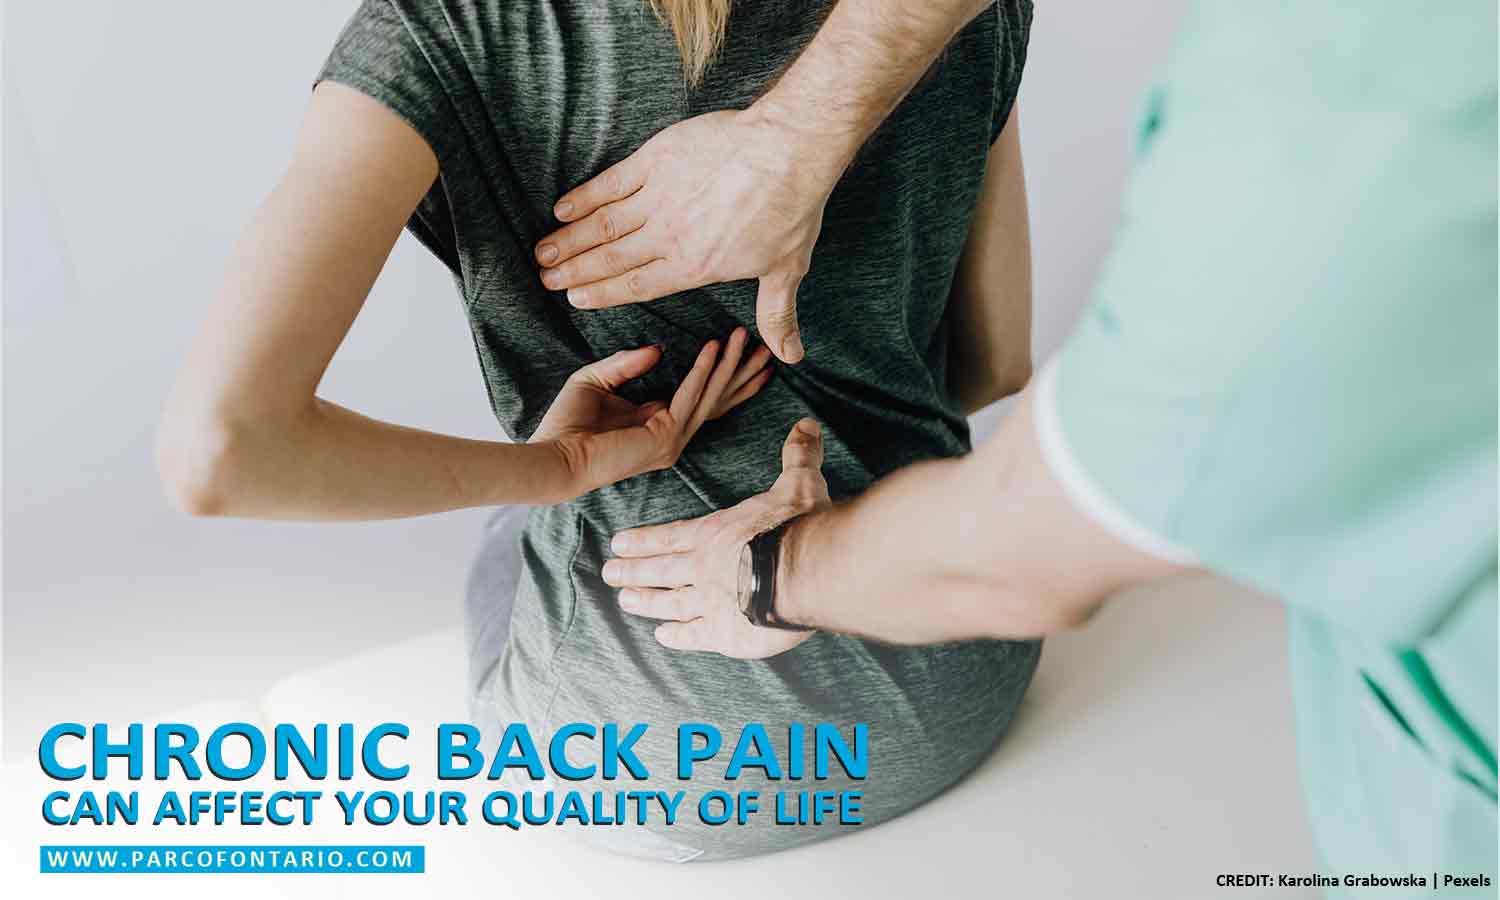 https://www.parcofontario.com/wp-content/uploads/2021/02/Chronic-back-pain-can-affect-your-quality-of-life.jpg